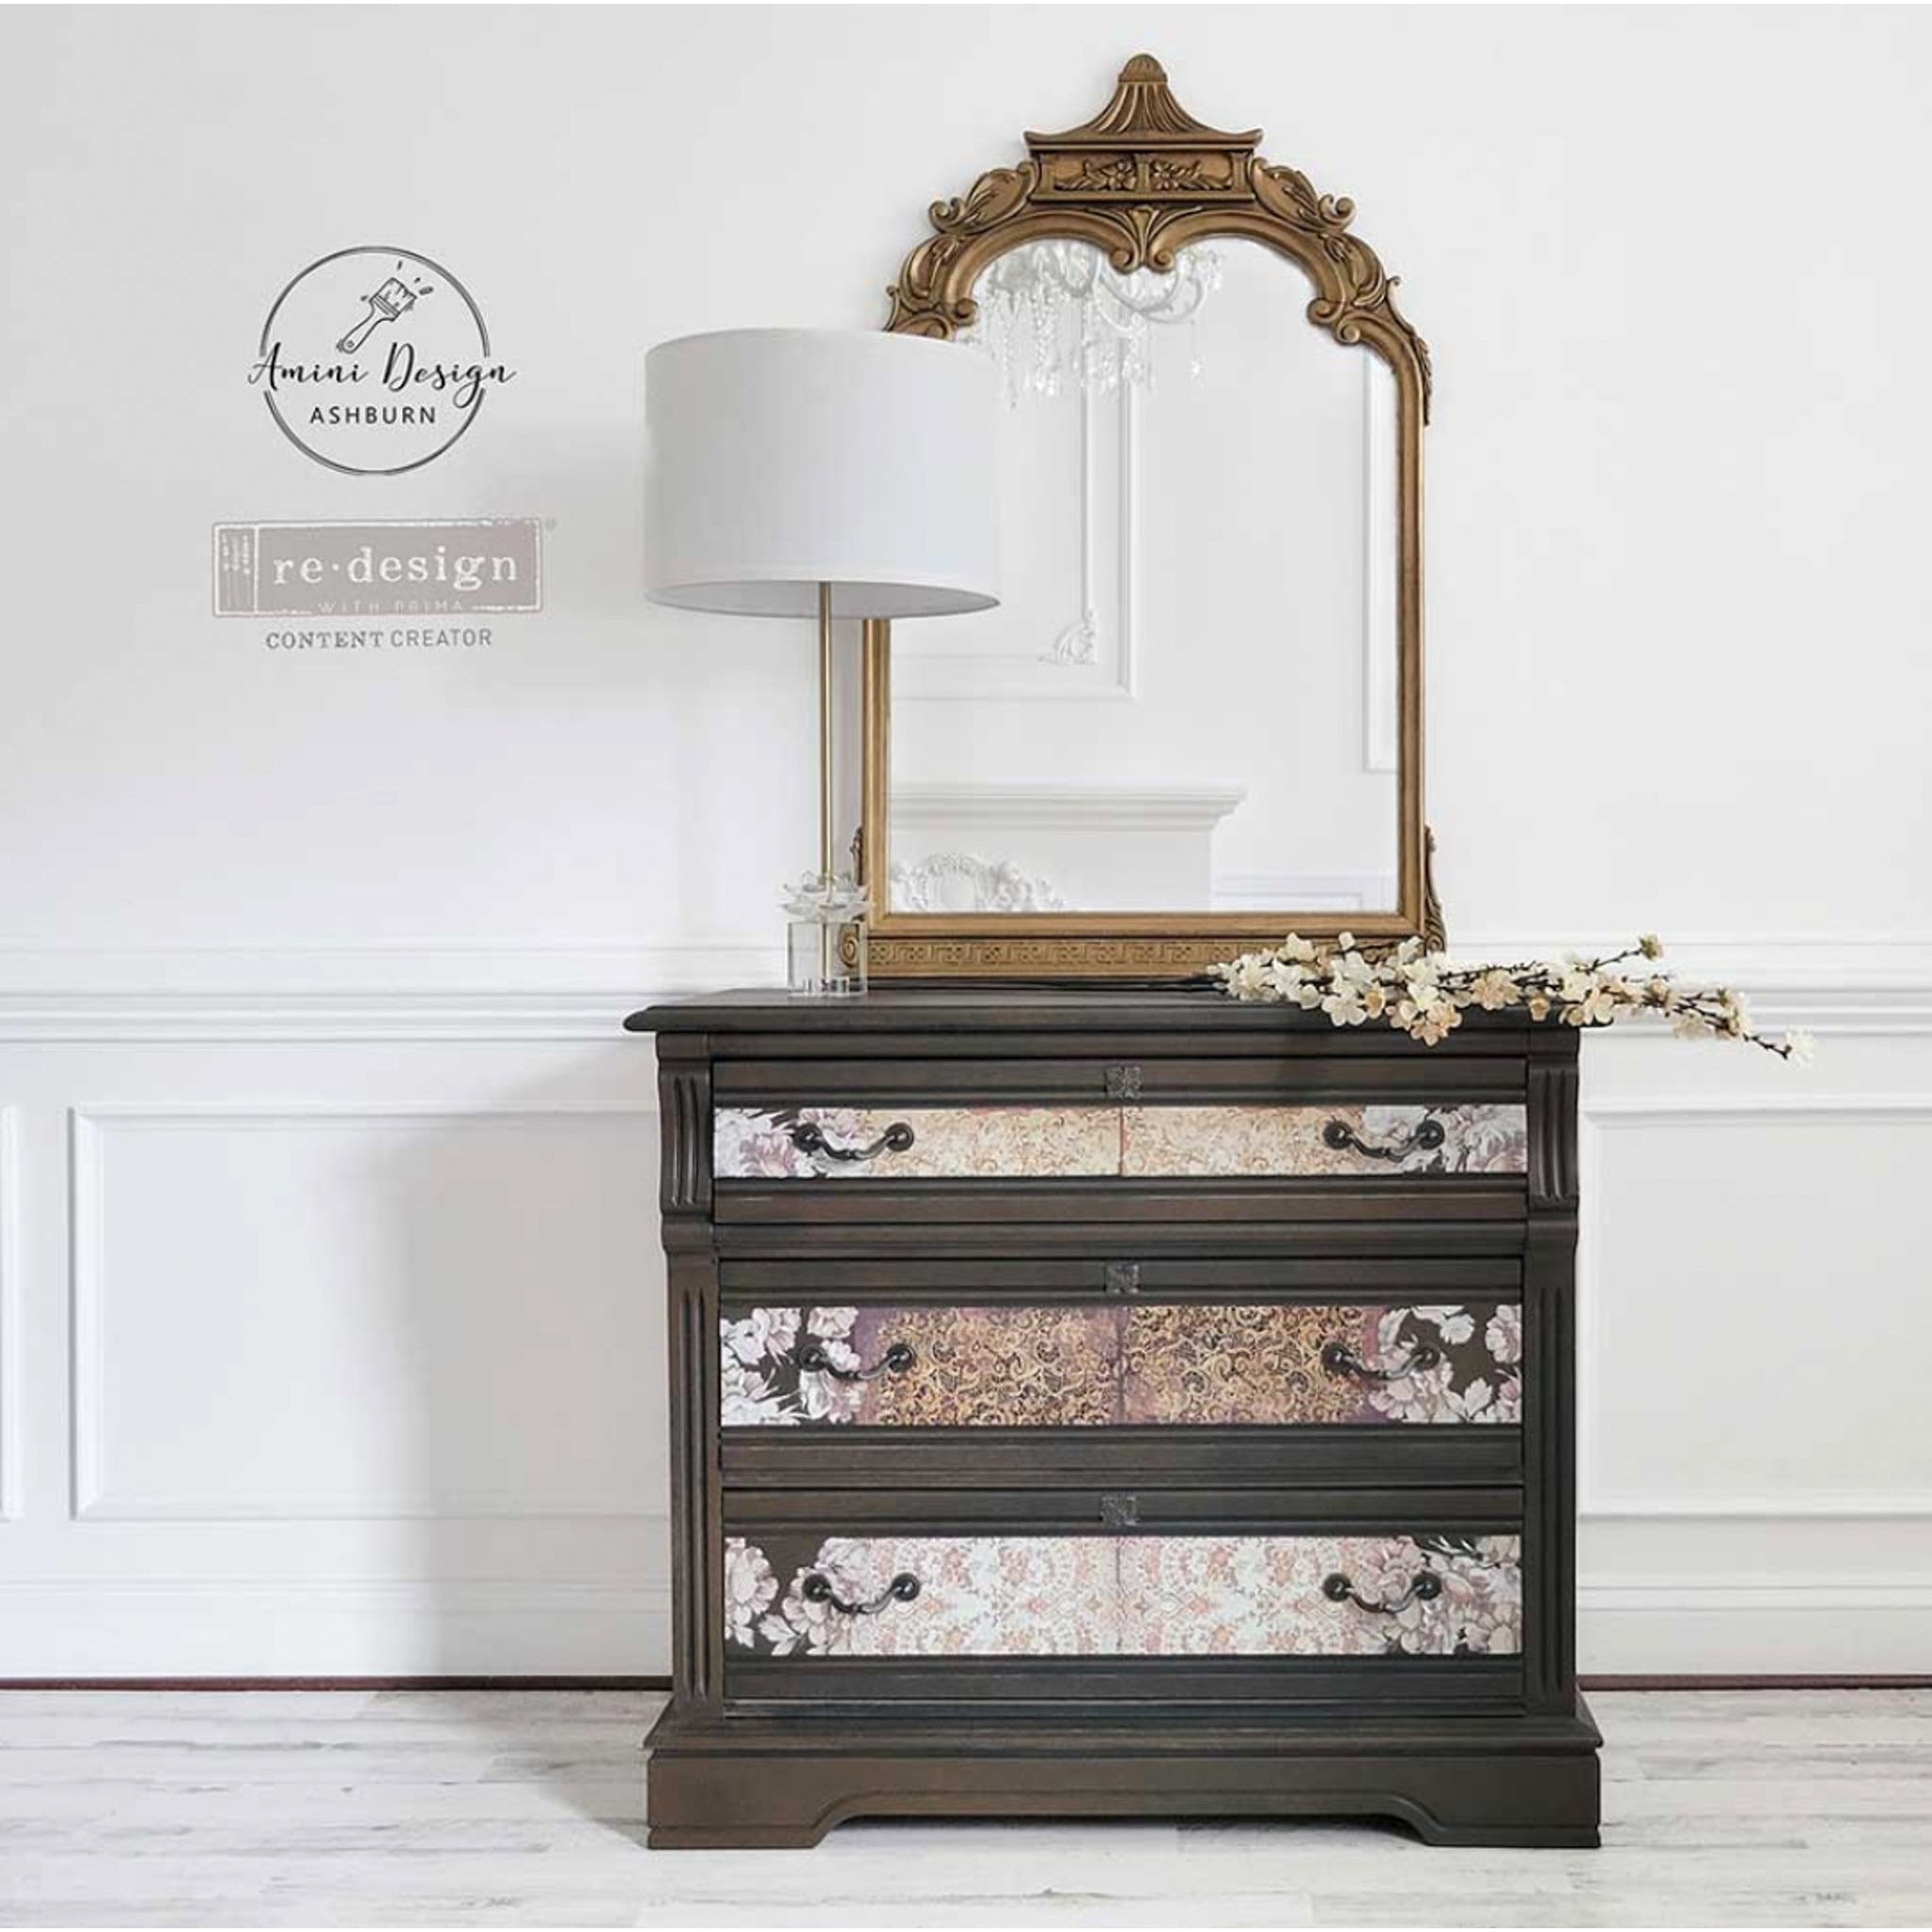 A vintage dresser refurbished by Amini Design Ashburn, a ReDesign with Prima Content Creator, is painted dark brown and features the Delicate Lace small transfers on its drawers.